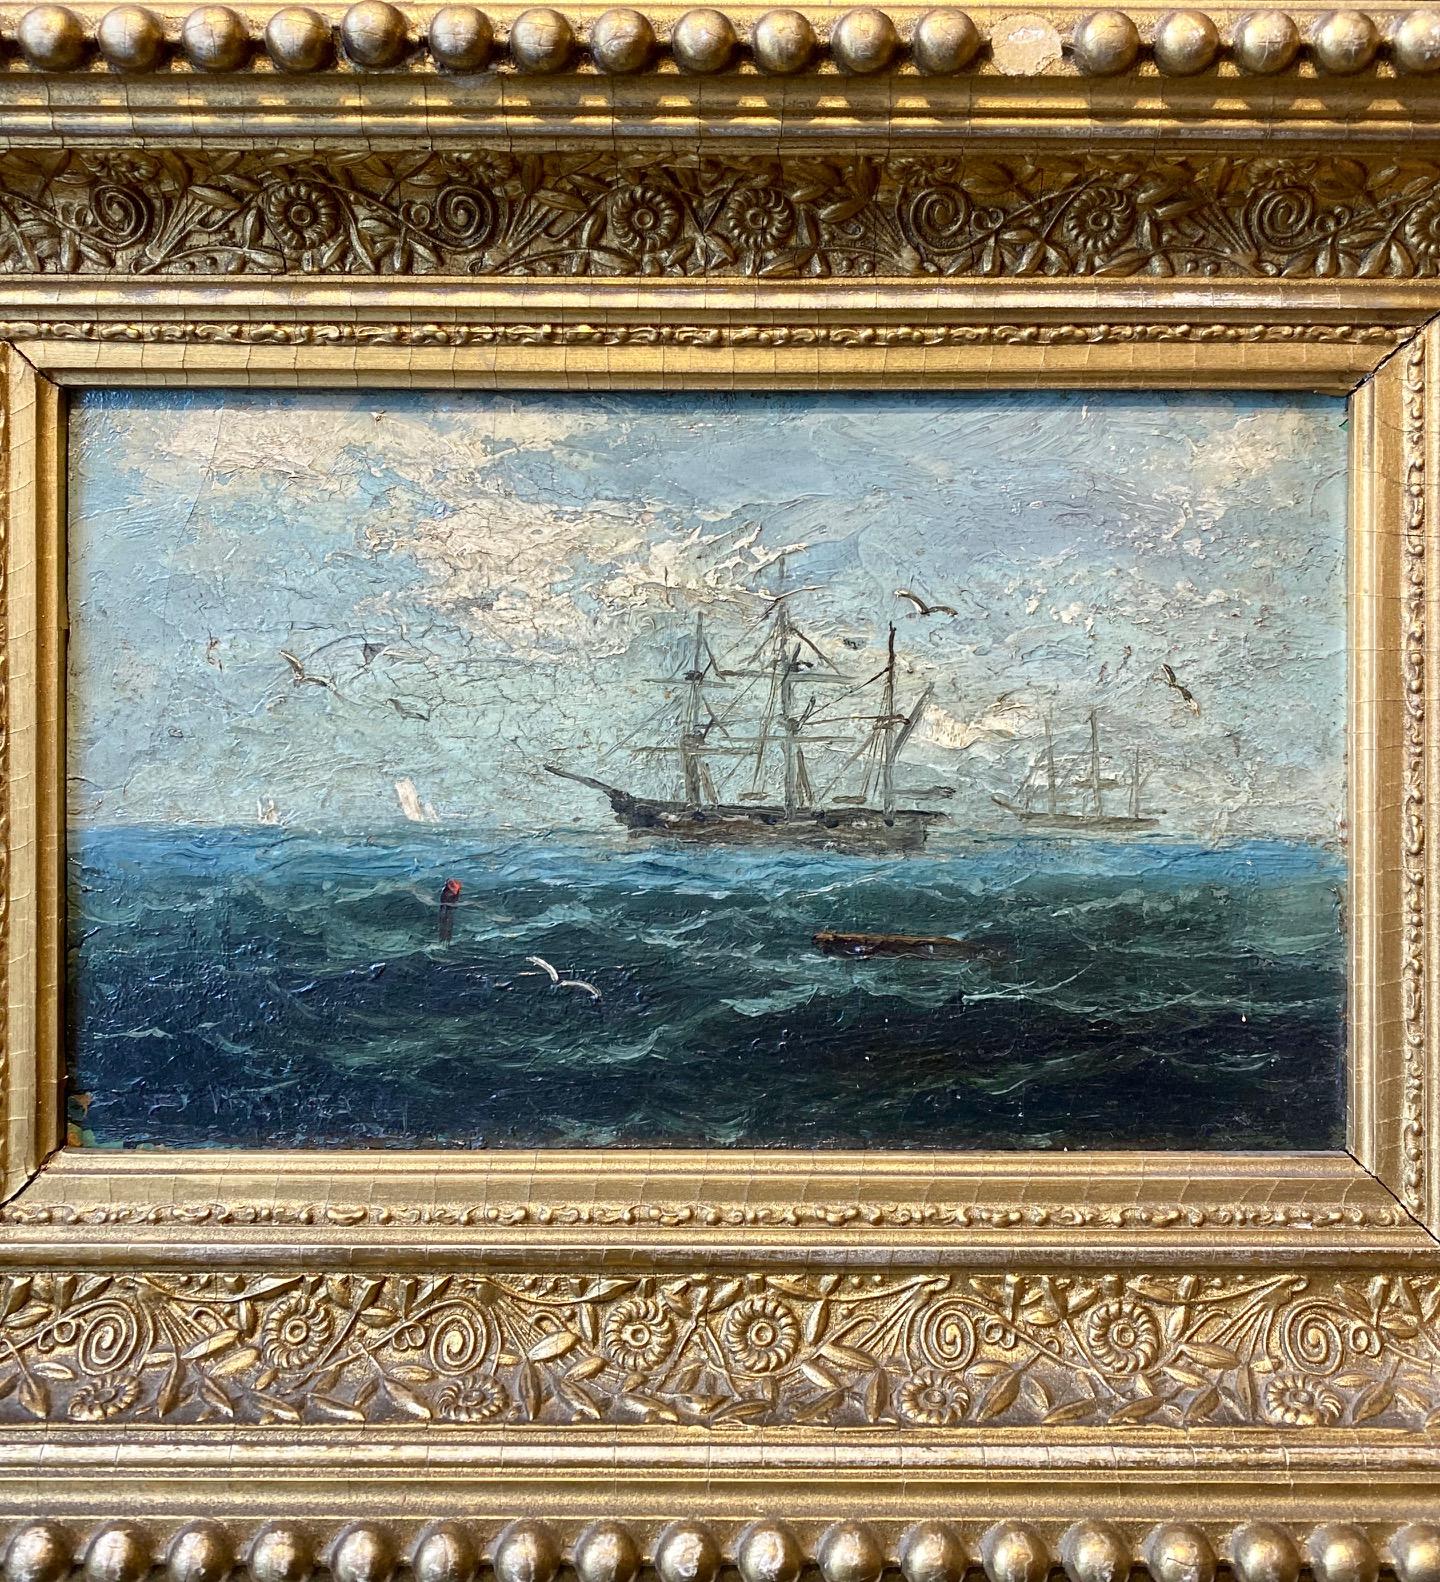 19th century seascape with whale ship, by J.H. Appleby, circa 1880, an oil on board view of a square rigged bark on the high seas, with another bark and another sail in the background, gulls in the air, a red buoy and perhaps a whale in the